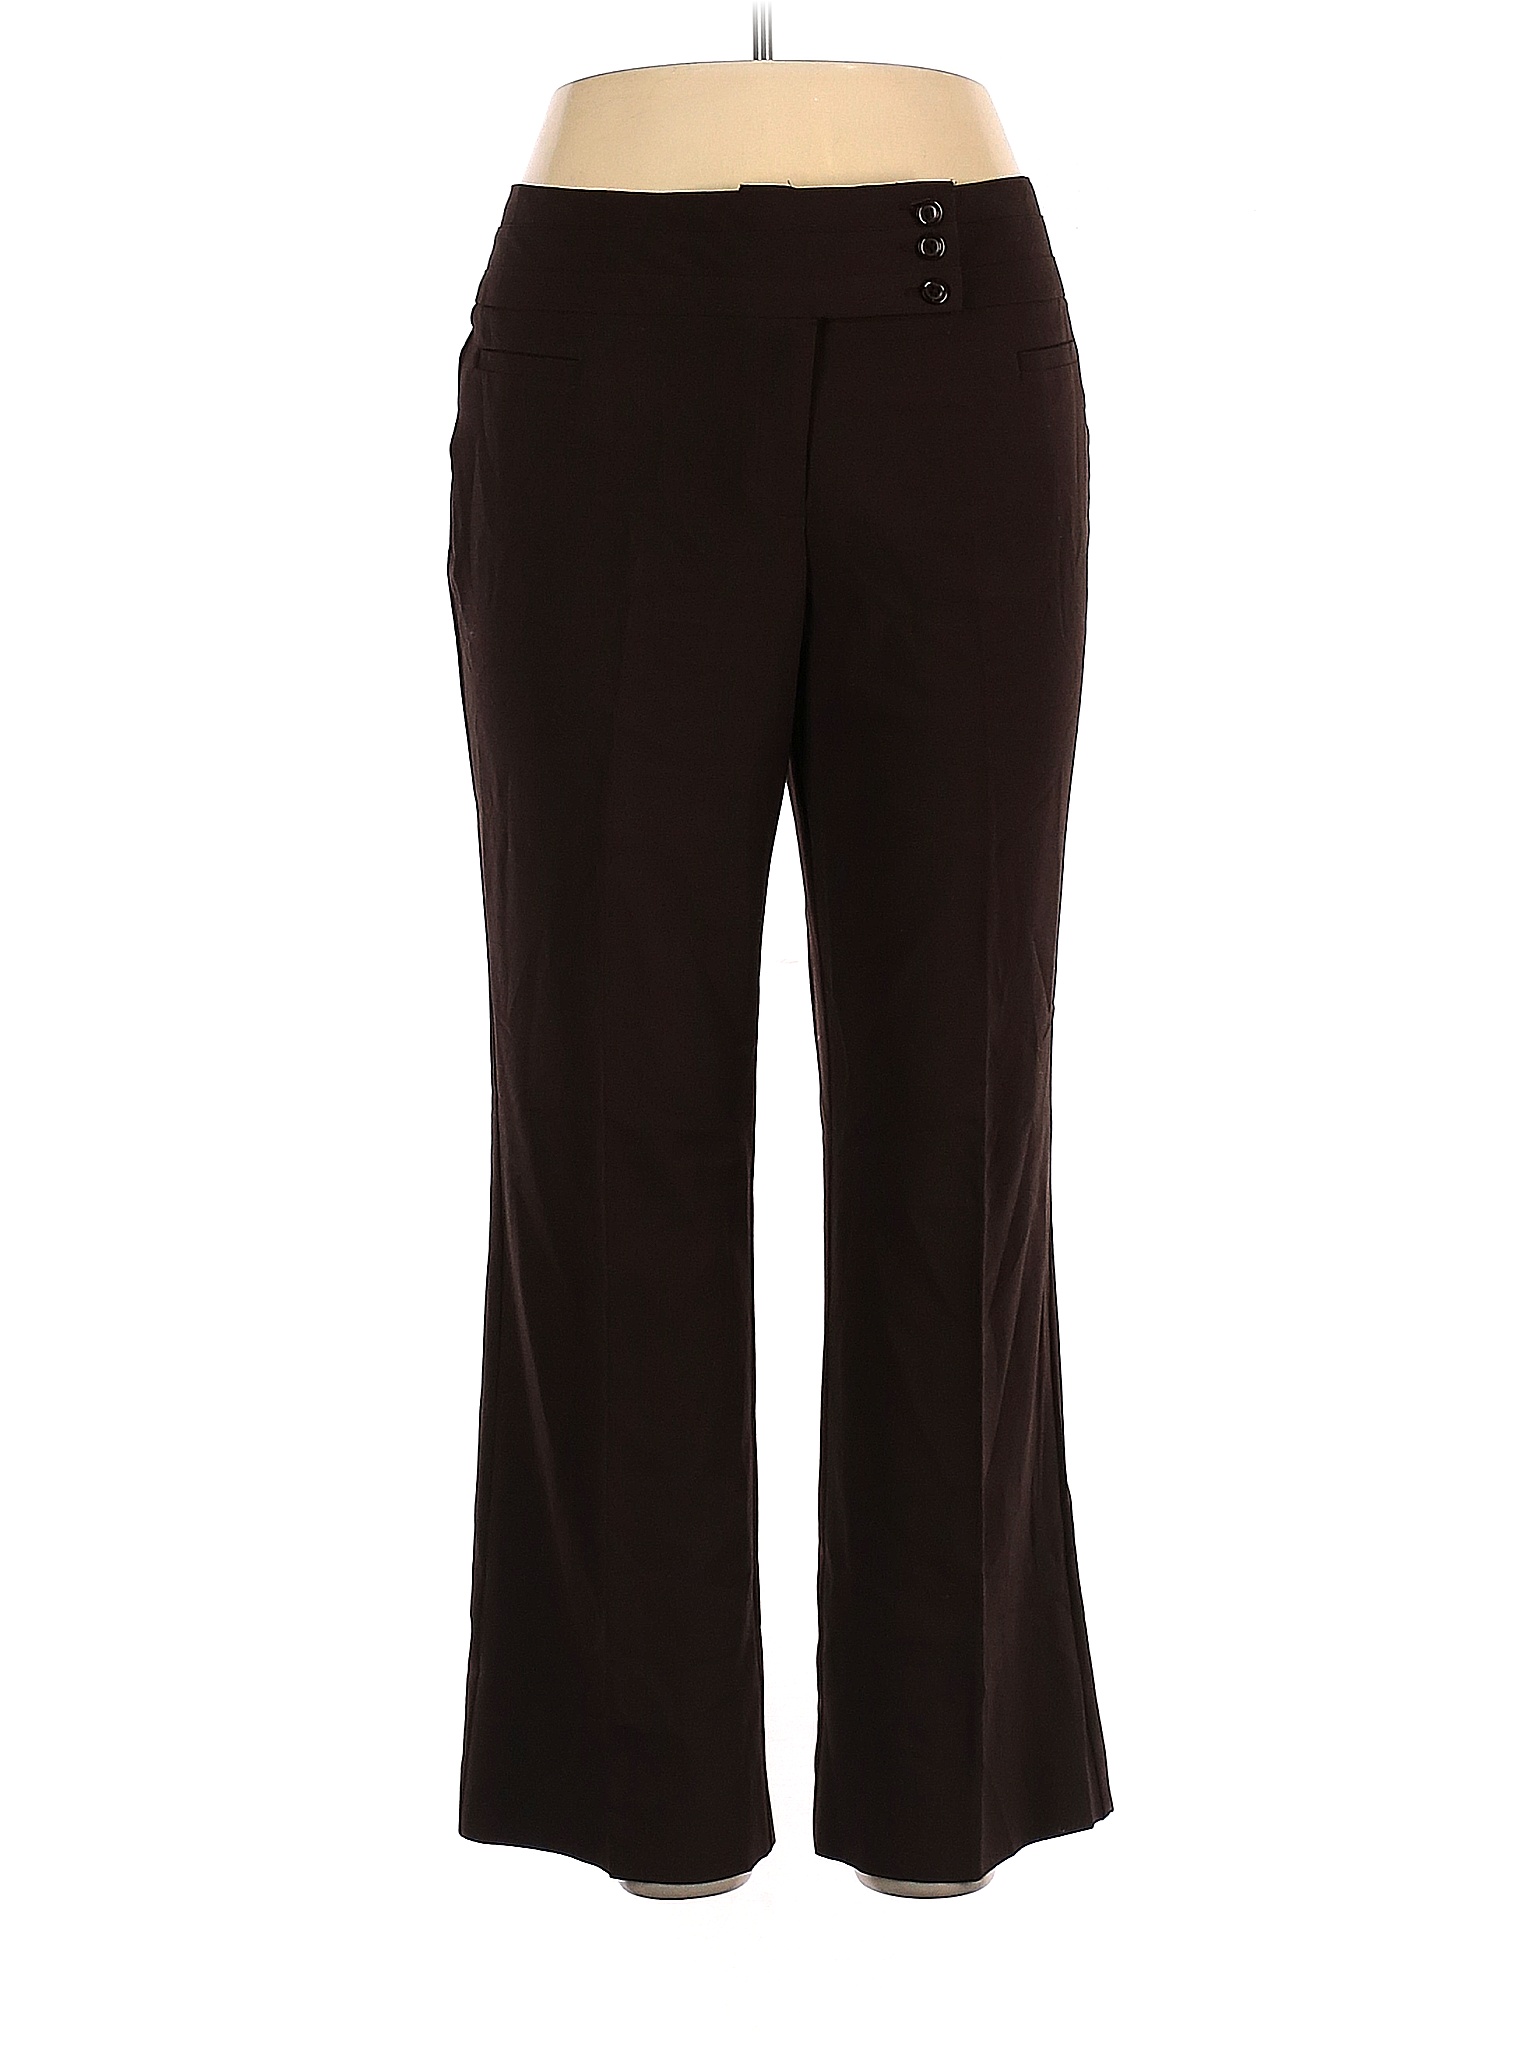 Counterparts Solid Brown Dress Pants Size 14 - 70% off | thredUP